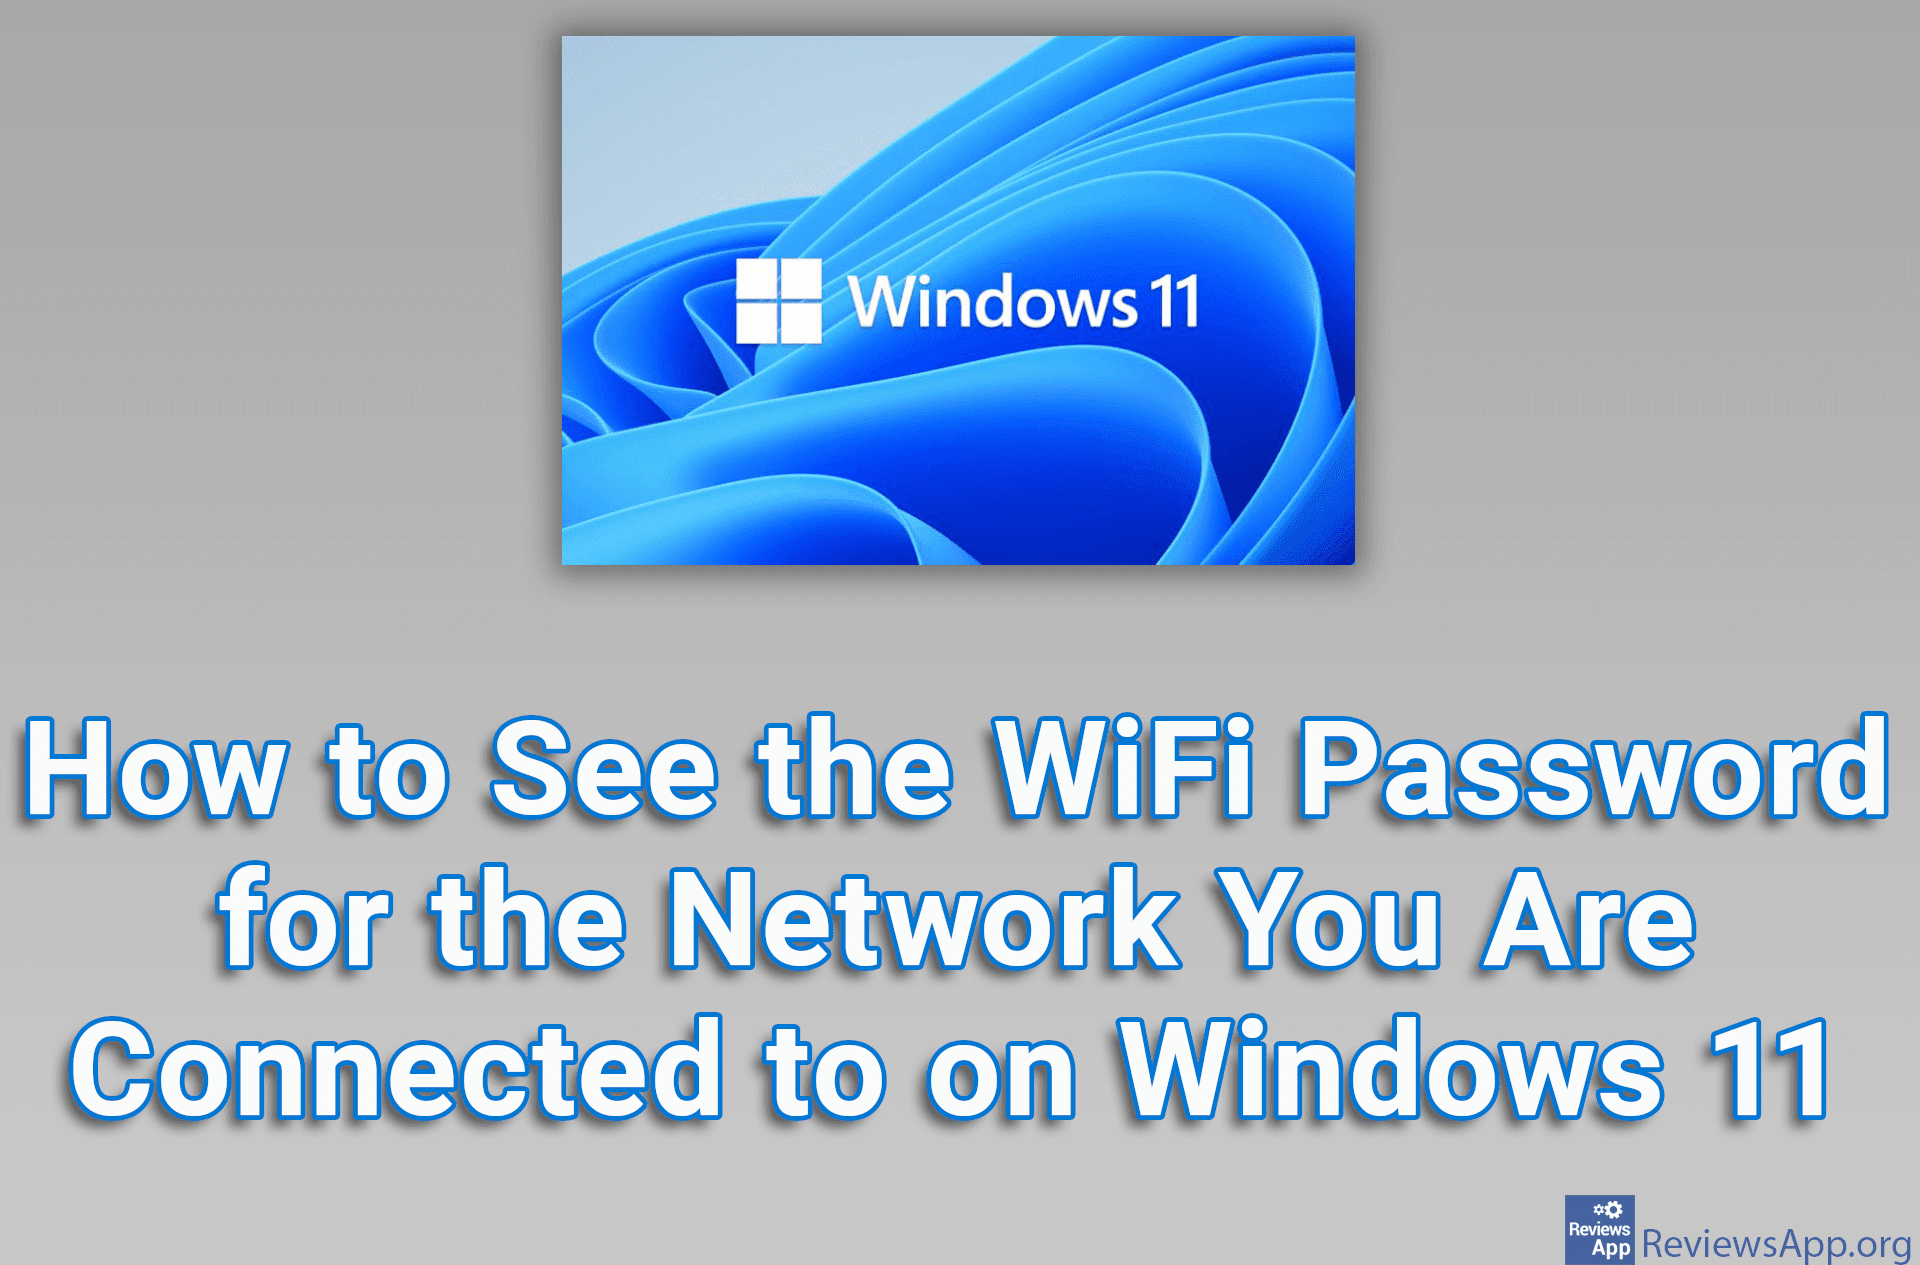 How to See the WiFi Password for the Network You Are Connected to on Windows 11